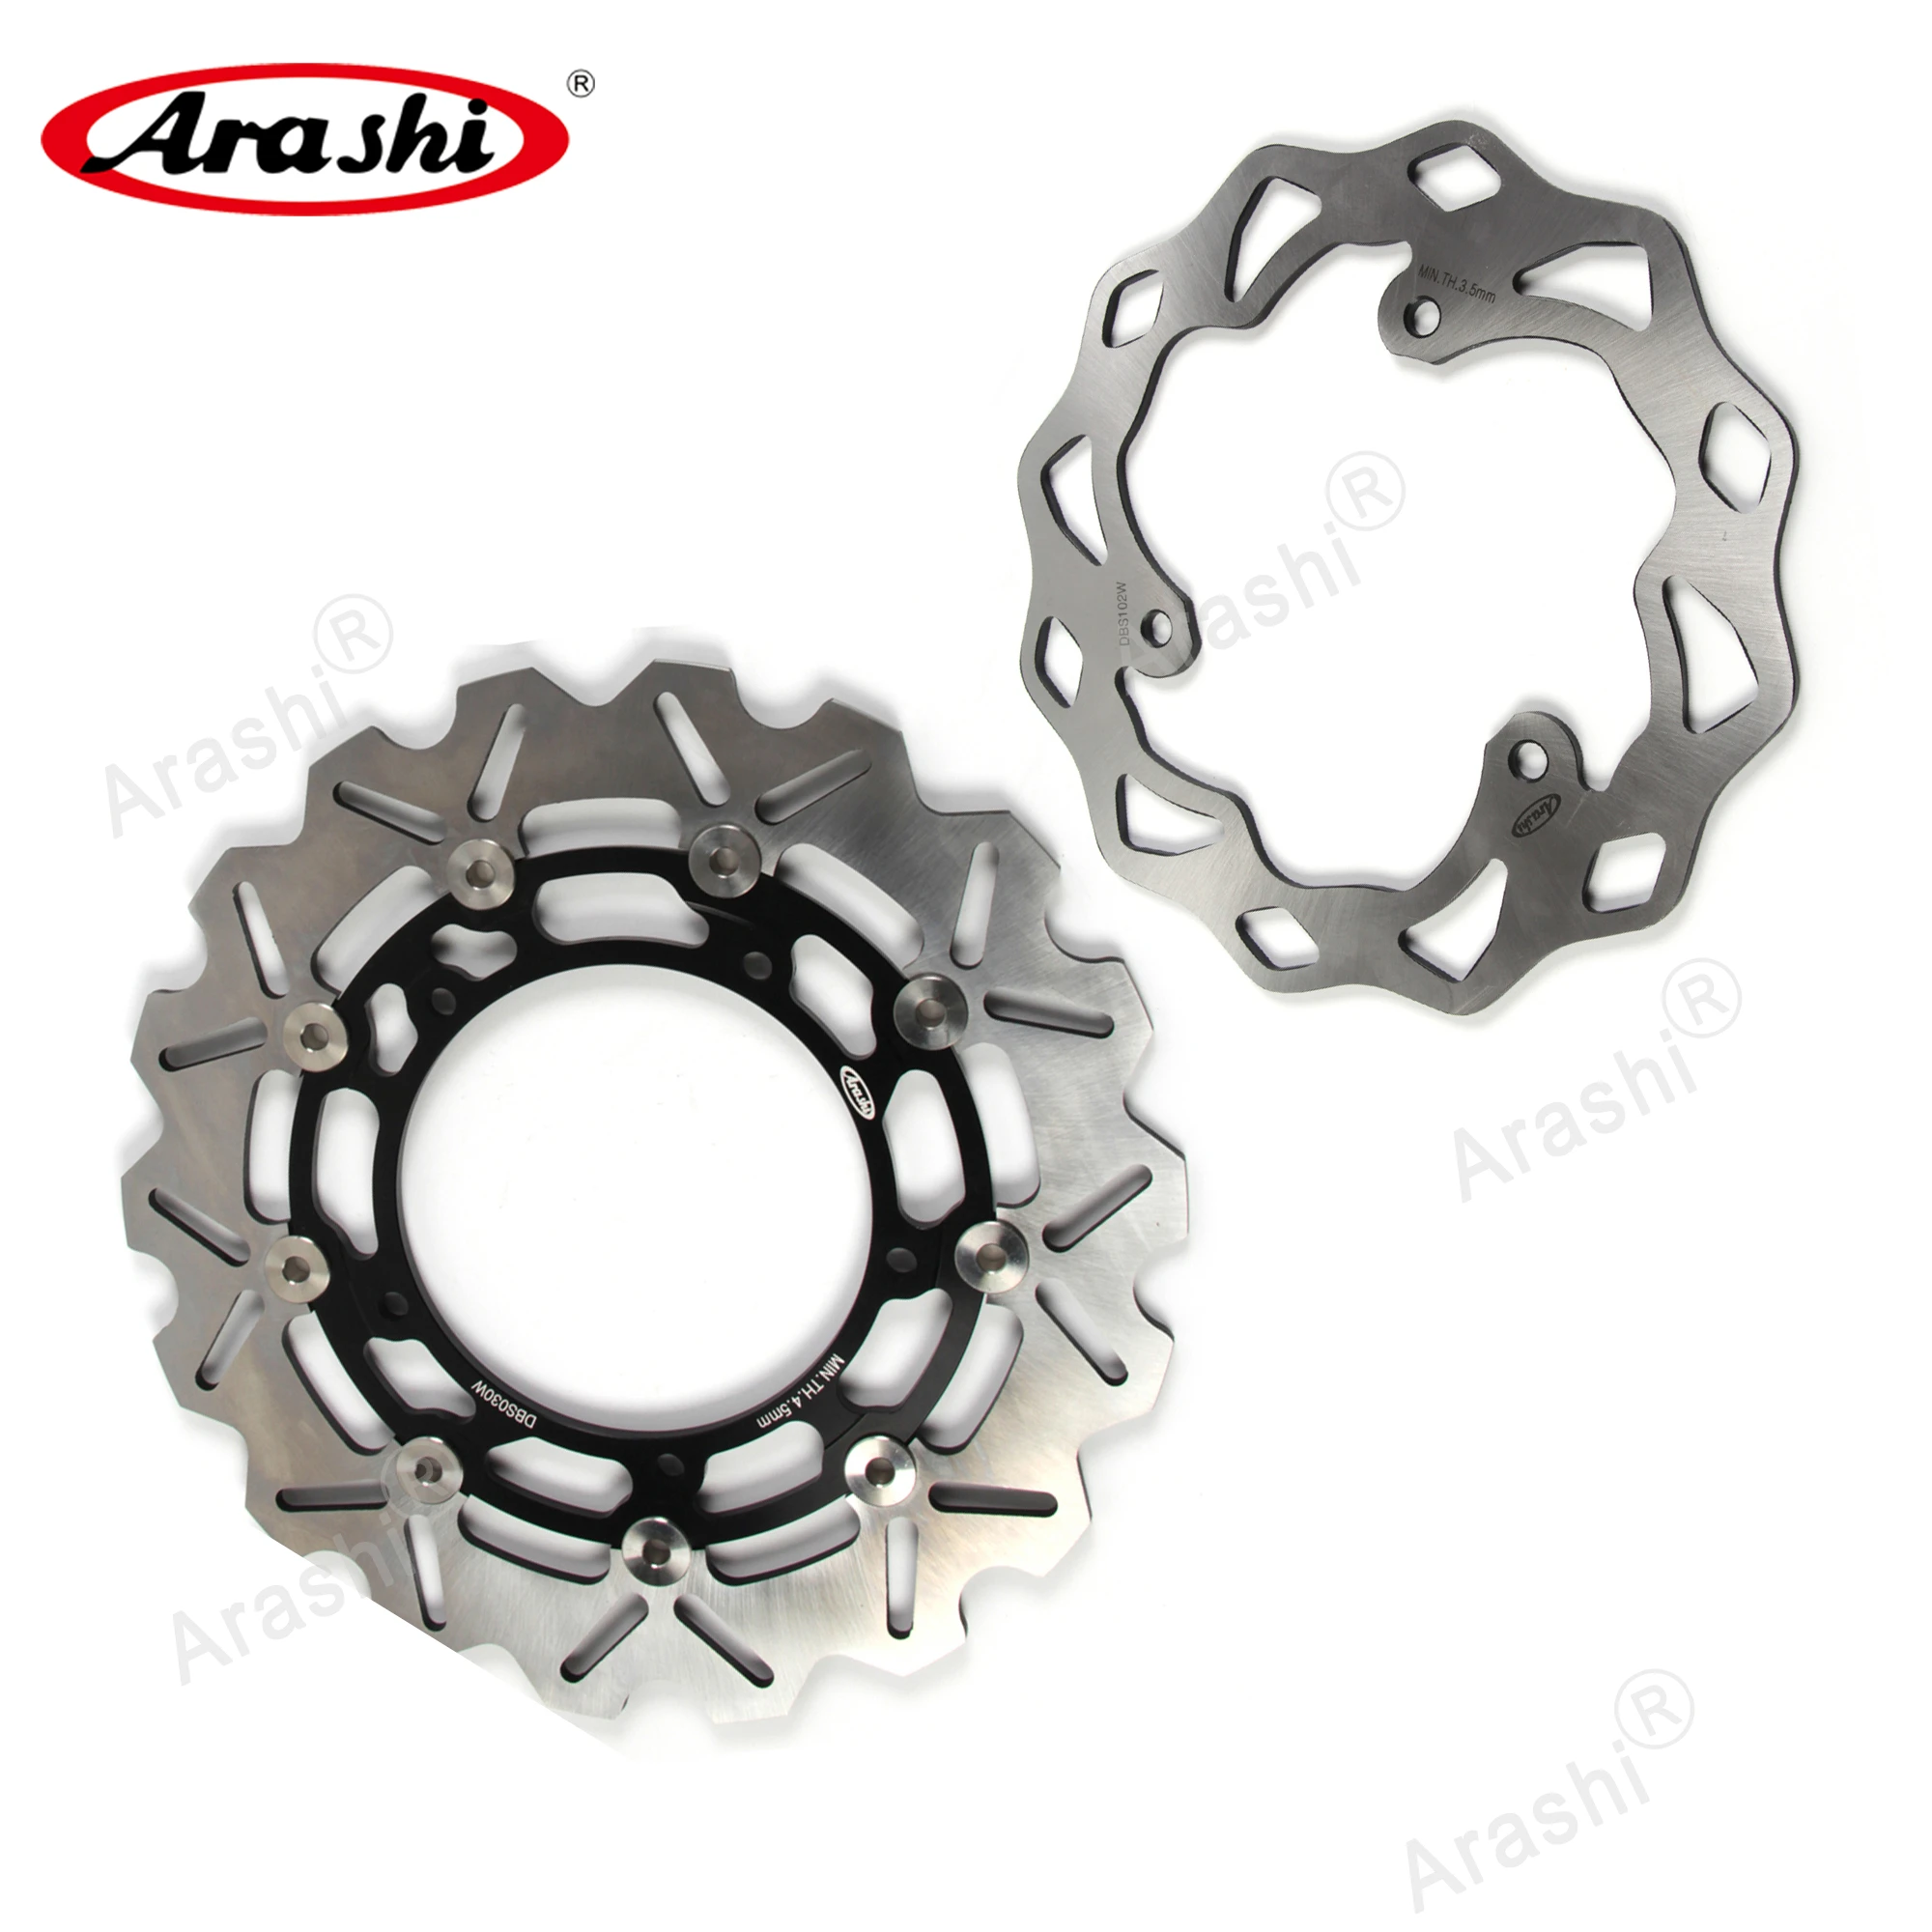 

ARASHI MT03 ABS 2016-2019 CNC Floating Front Rear Brake Rotor For YAMAHA MT-03 MT 03 2016 2017 2018 2019 / YZF-R3 ABS 320 2017